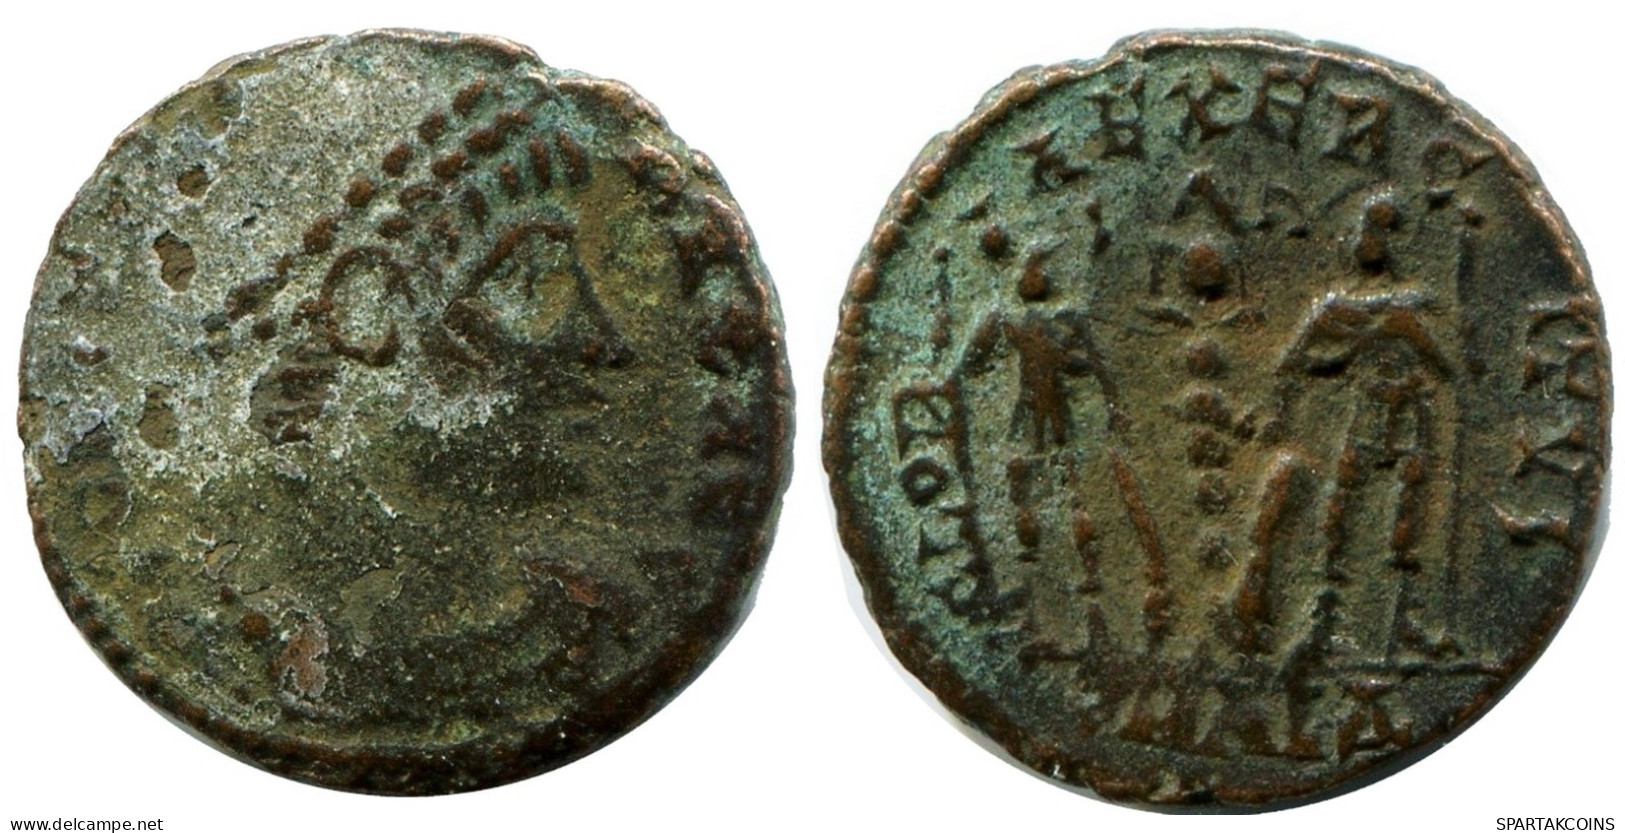 CONSTANS MINTED IN ALEKSANDRIA FROM THE ROYAL ONTARIO MUSEUM #ANC11409.14.E.A - L'Empire Chrétien (307 à 363)